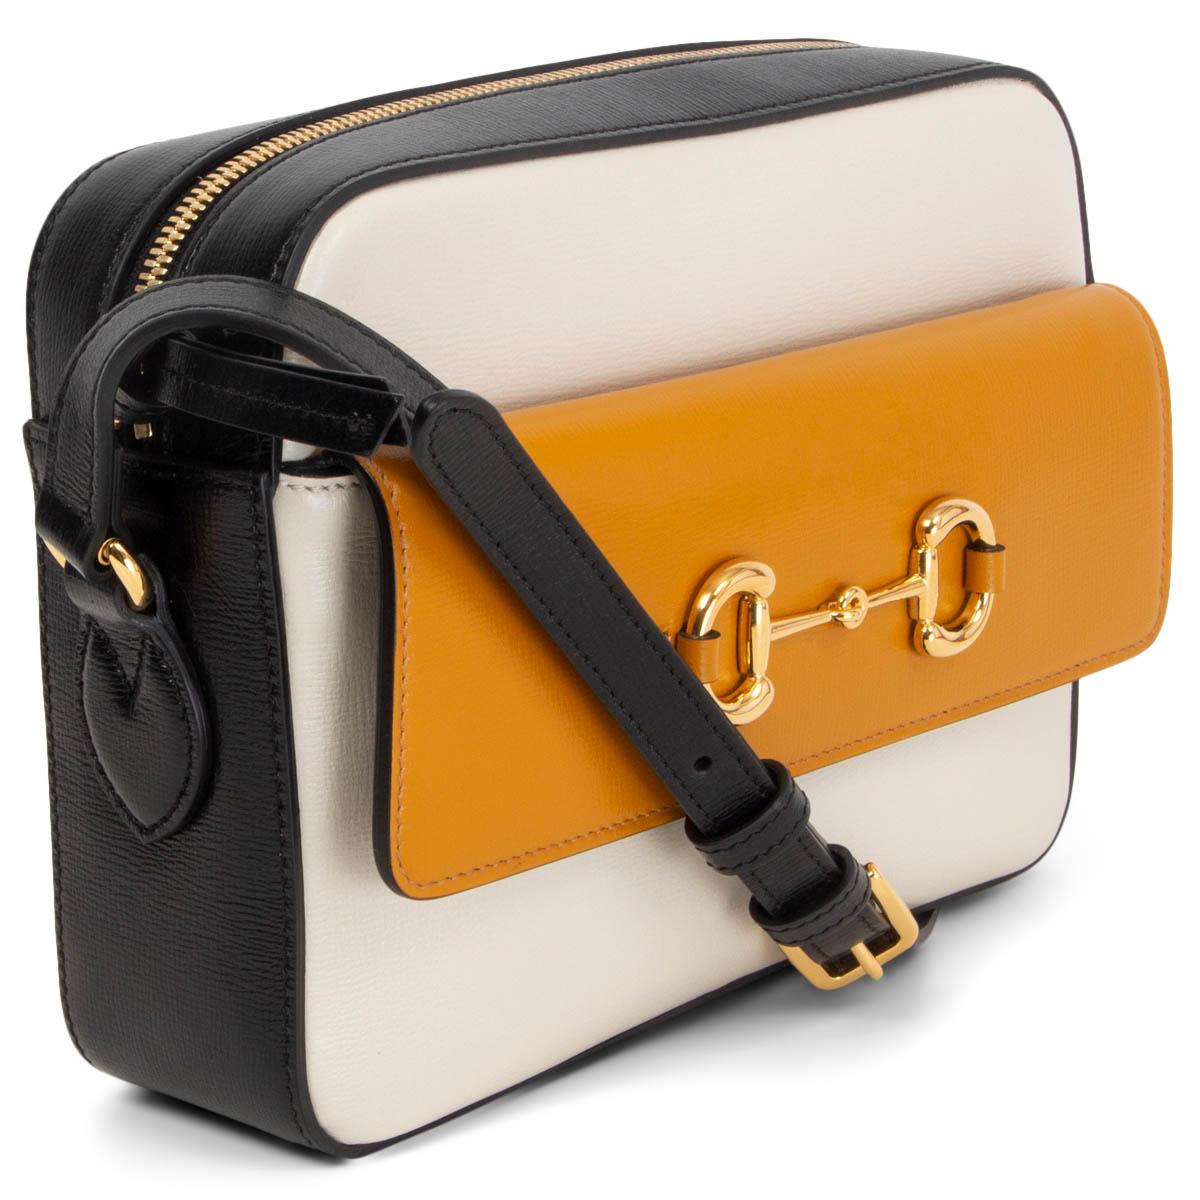 100% authentic Gucci Horsebit 1955 shoulder bag in mustard, black and off-white textured leather featuring a horsebit flap pocket at front. Opens with a zipper on top and is lined in off-white canvas with one zipper pocket against the back. Comes